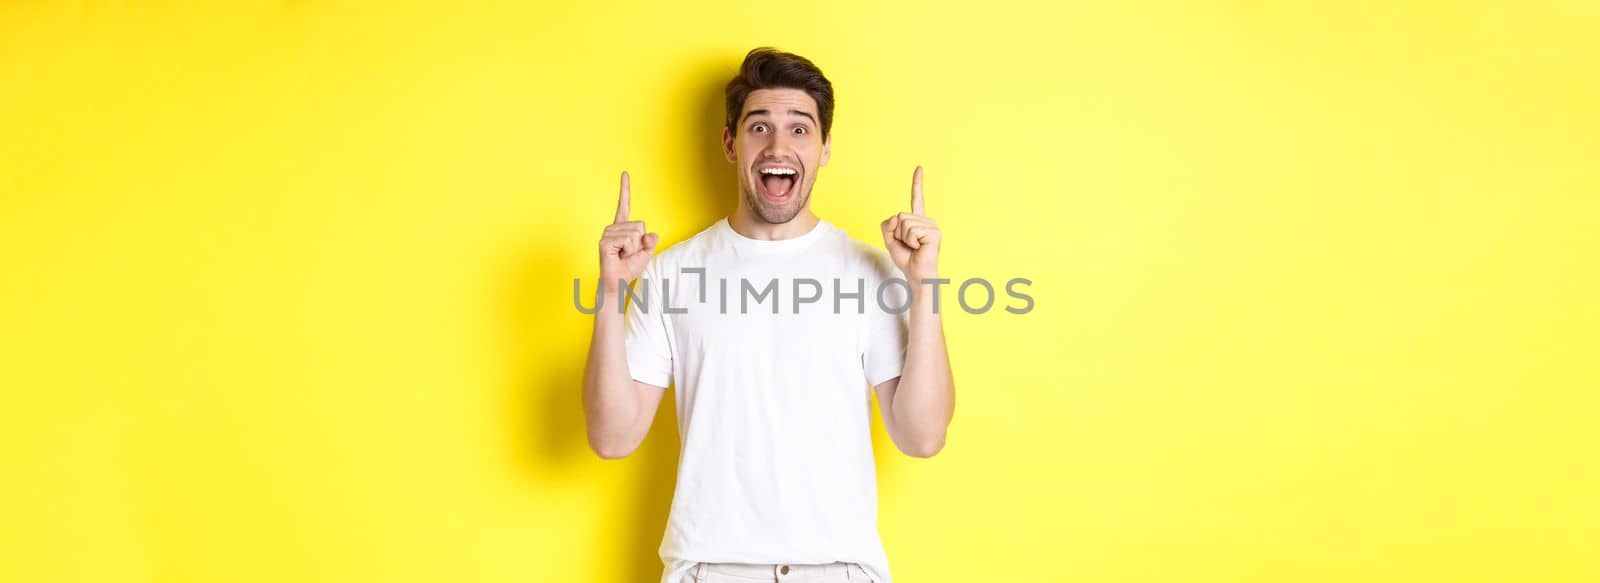 Portrait of excited handsome man in white t-shirt, pointing fingers up, showing offer, standing against yellow background.